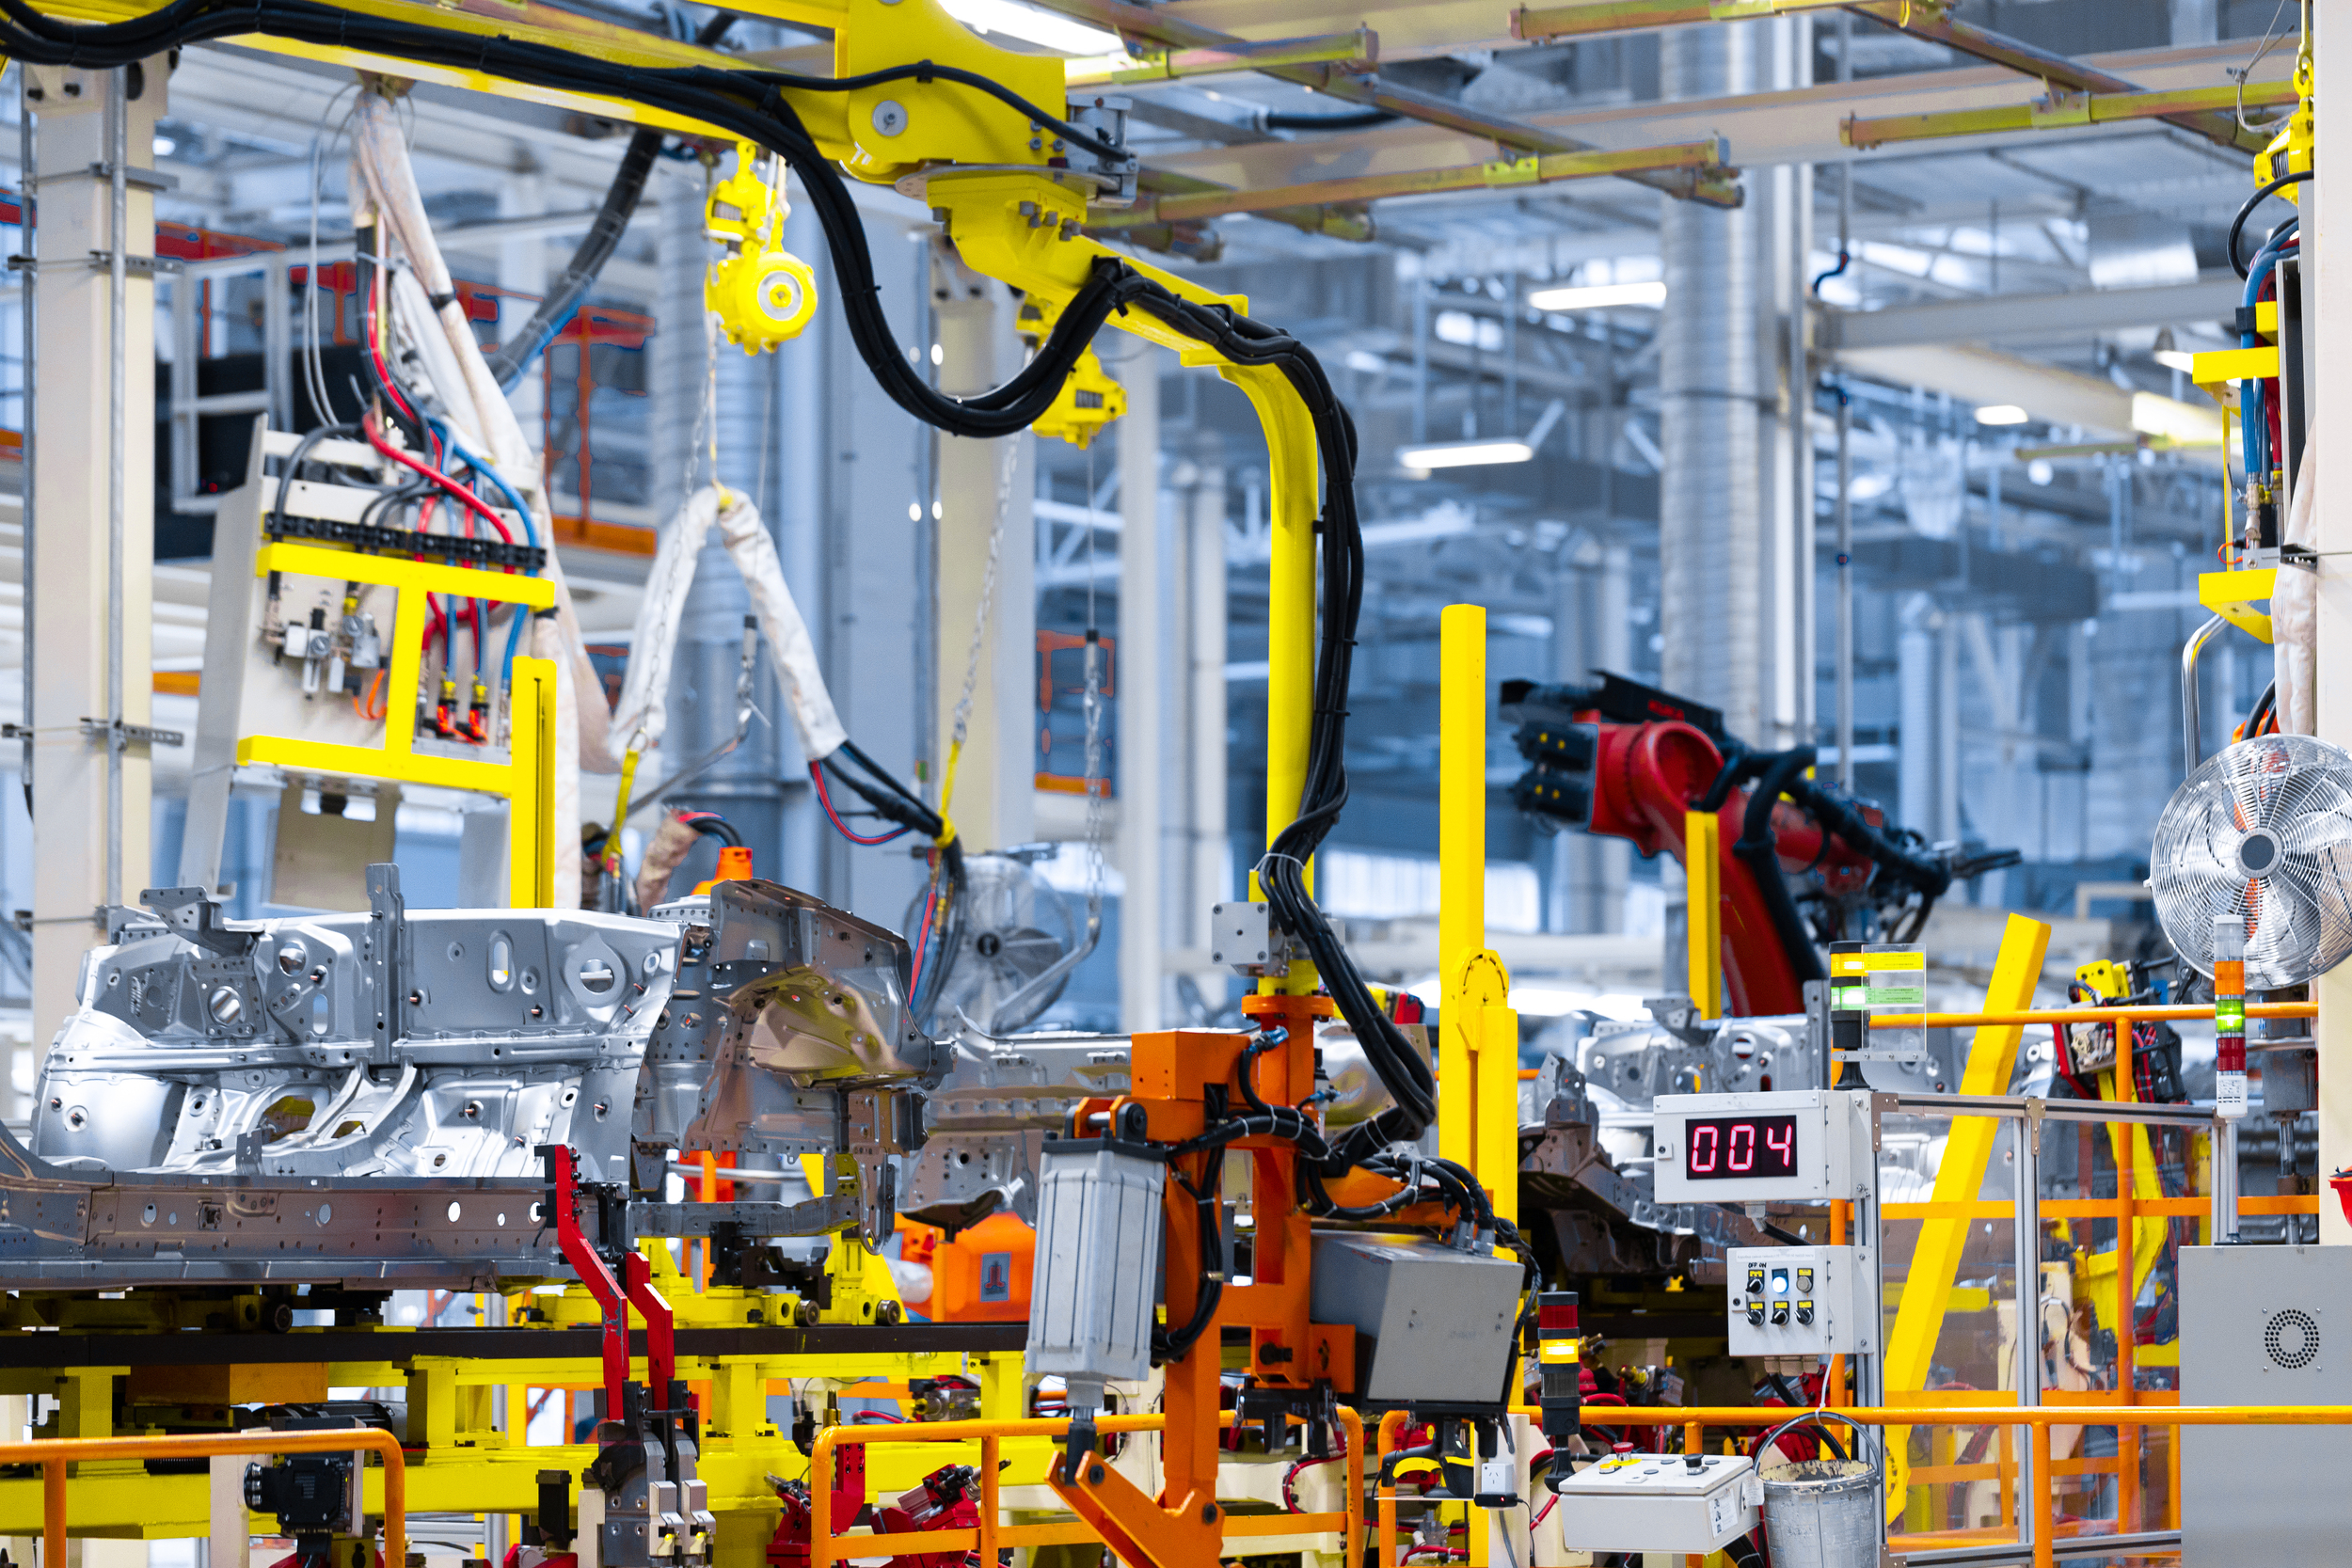 modern automated assembly line for cars. latest technological neutral technologies of production of cars at plant. Assembly shop for modern cars